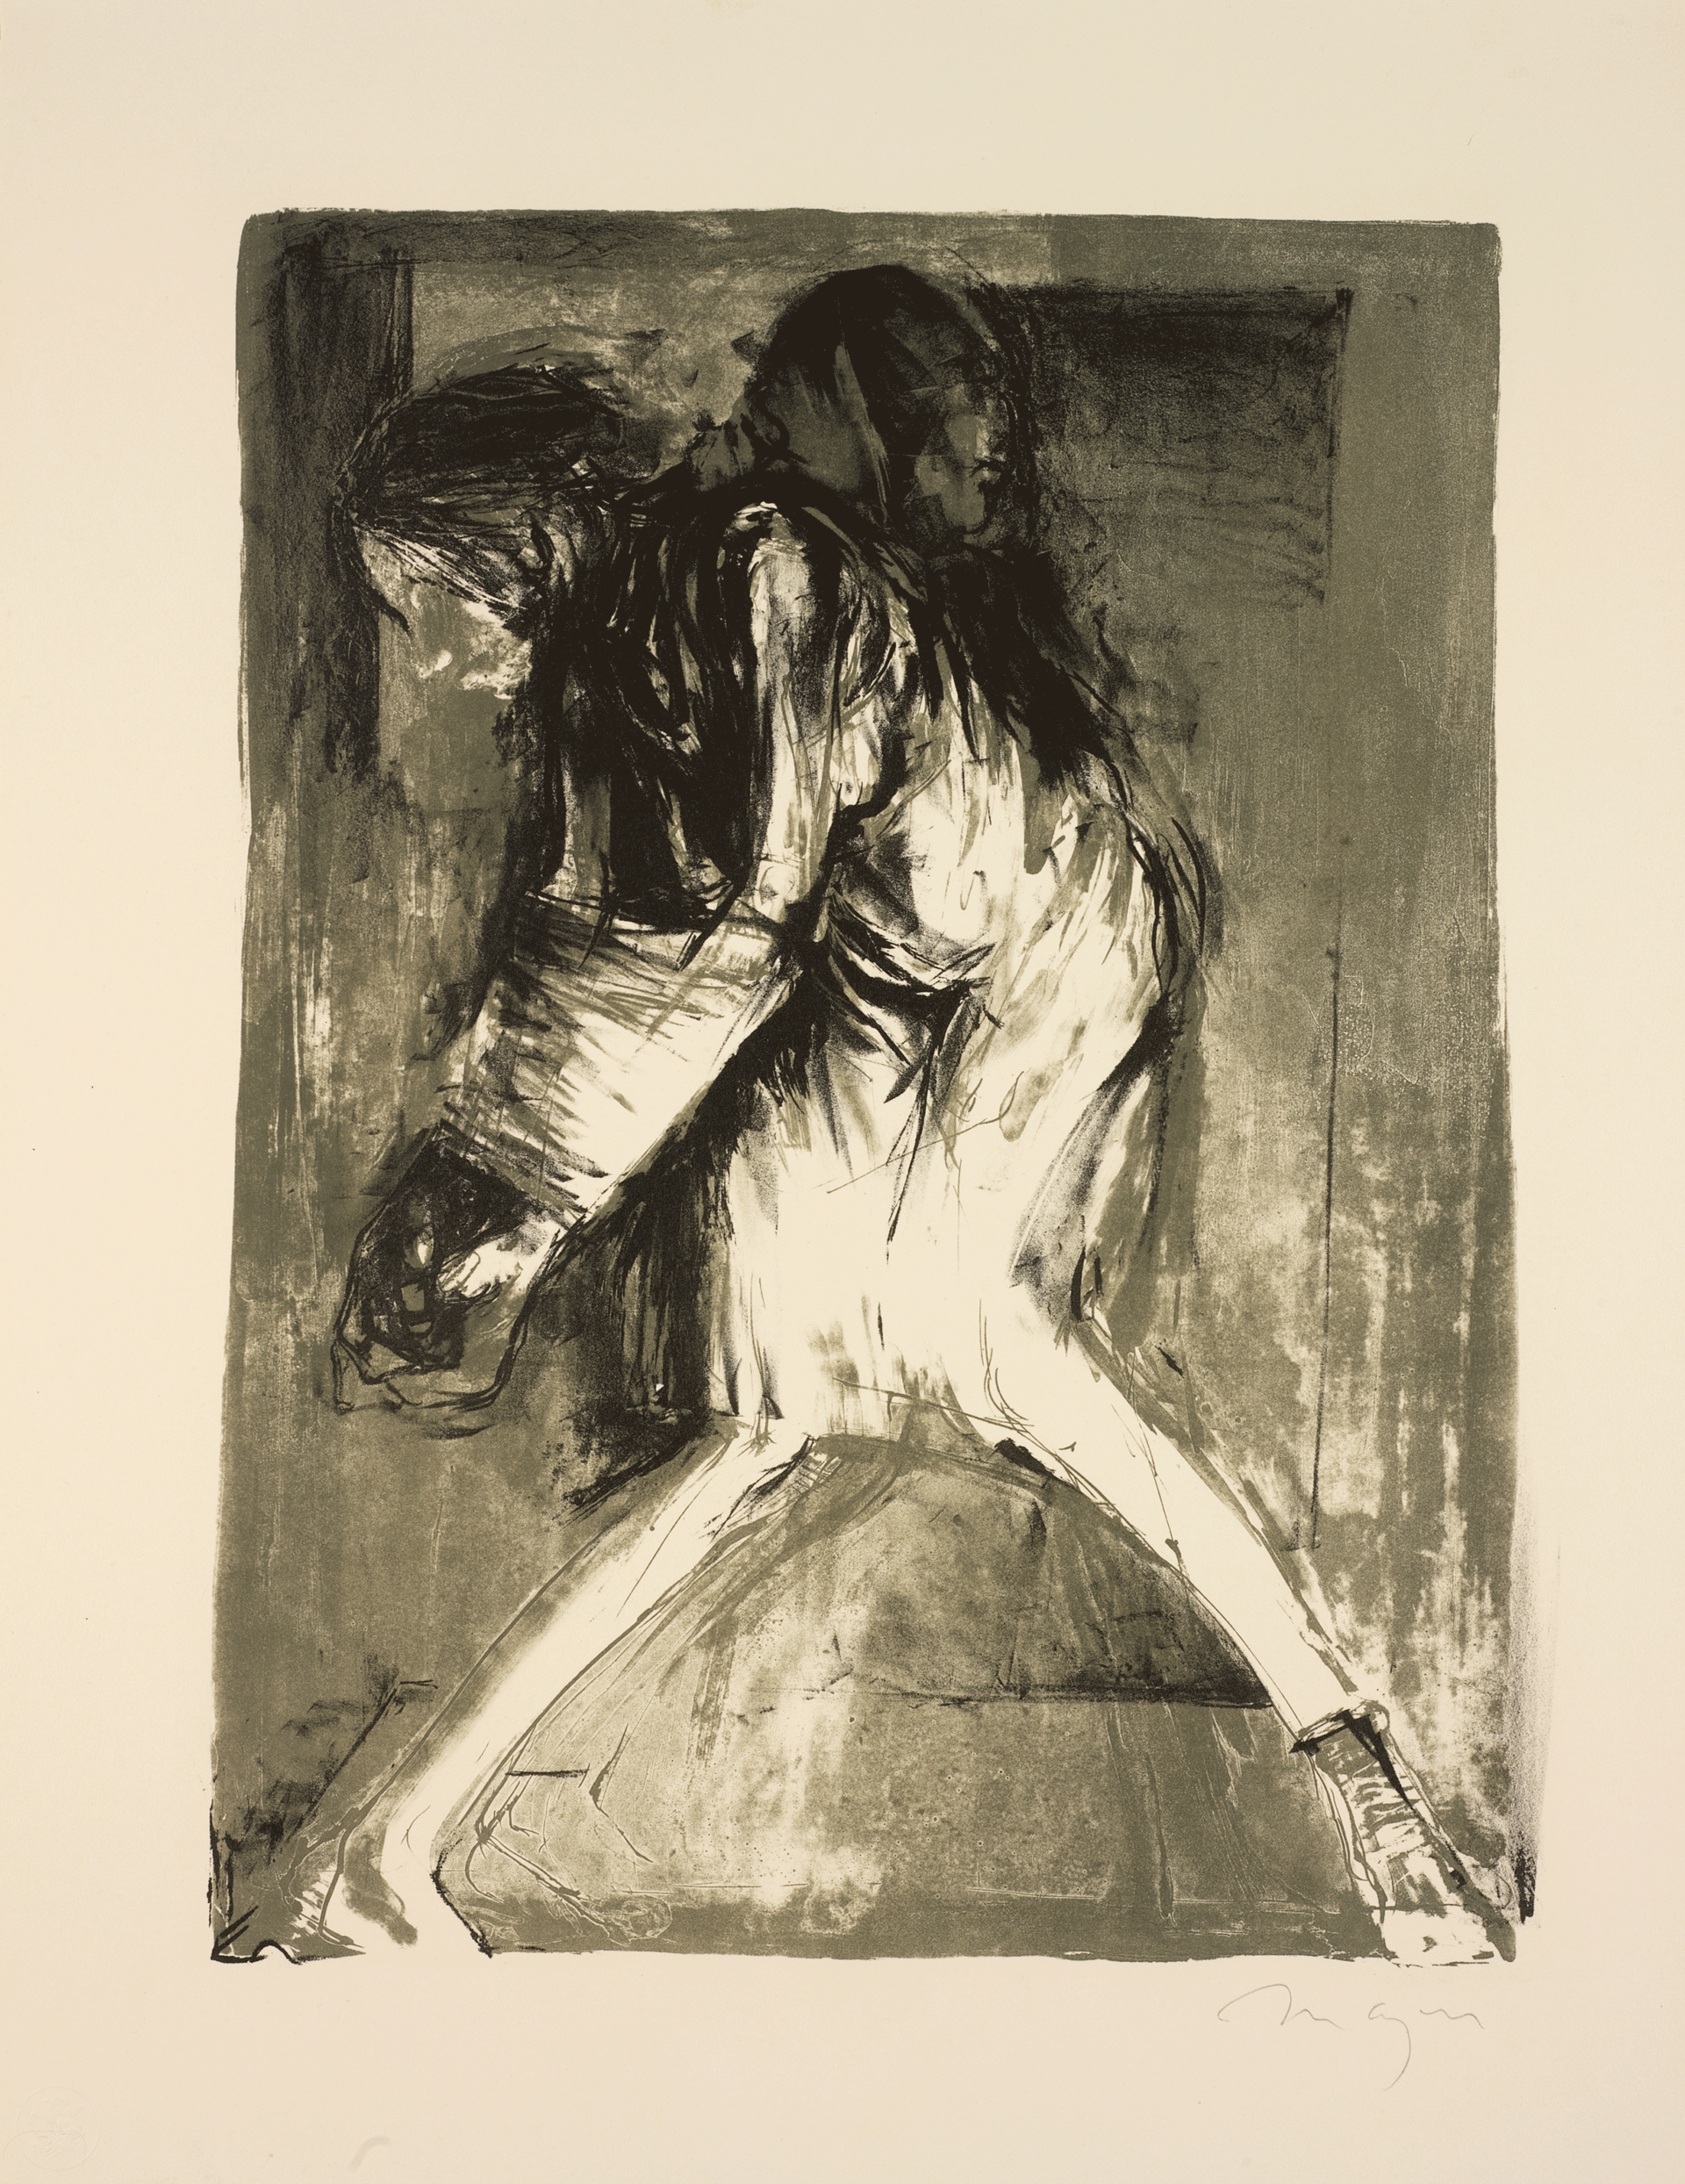 Streaky, eerie print of a tortured, hunched woman in a room lit from below. She is in a knee-length gown with her knees bent inwards. Her arms are bound together.